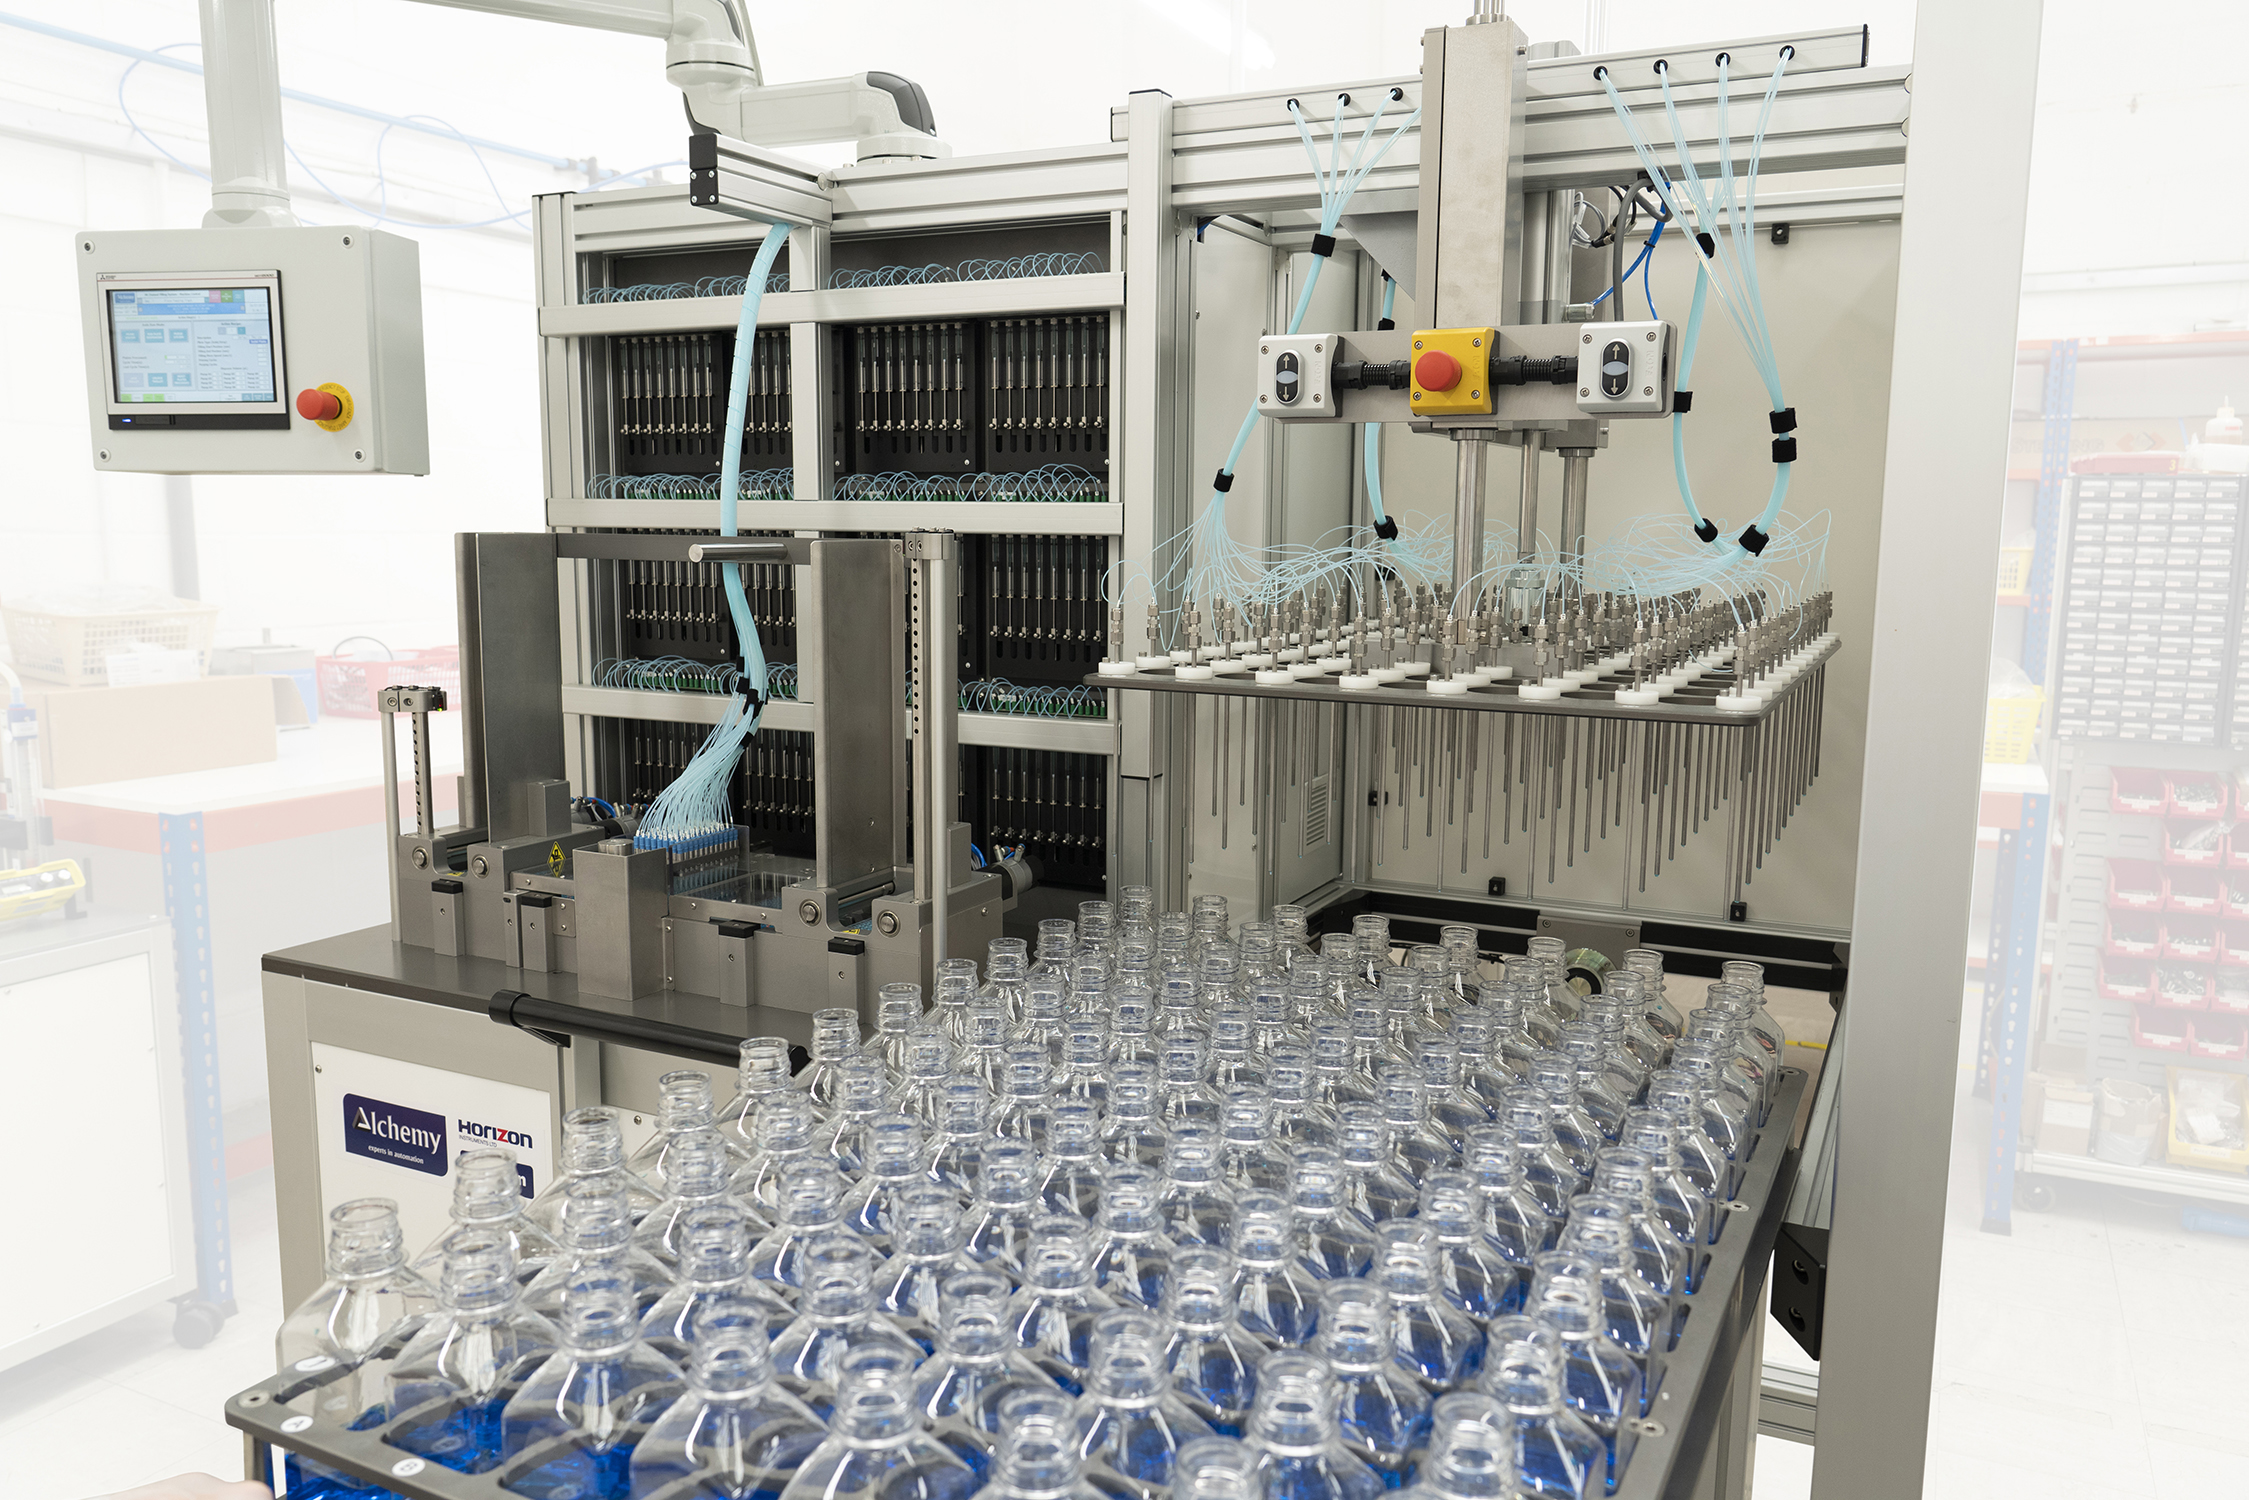 Mitsubishi Electric has supported Horizon Instruments in the development of a highly automated well plate filling machine which has increased production yield of its end customer by 700-800% and is projected to cut waste by half.